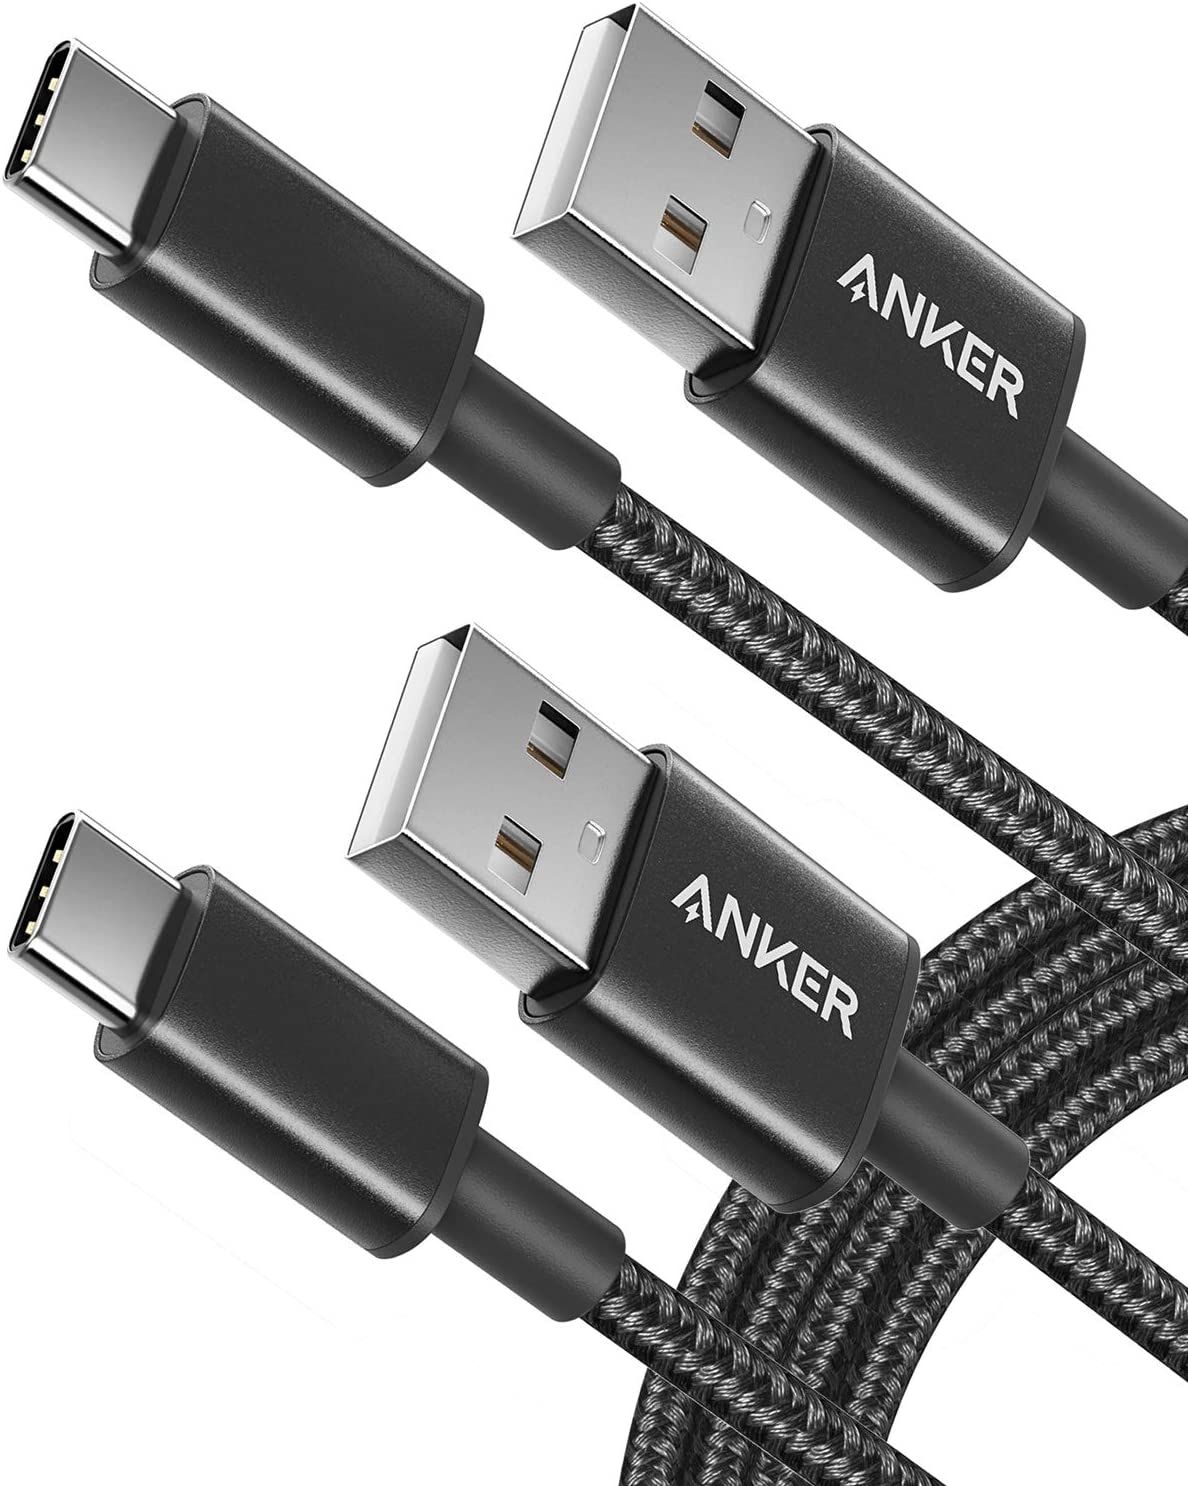 USB C Android Auto Cable [Upgrade, 1.6ft, 2Pack] 10Gbps USB 3.1 Gen 2 USB A